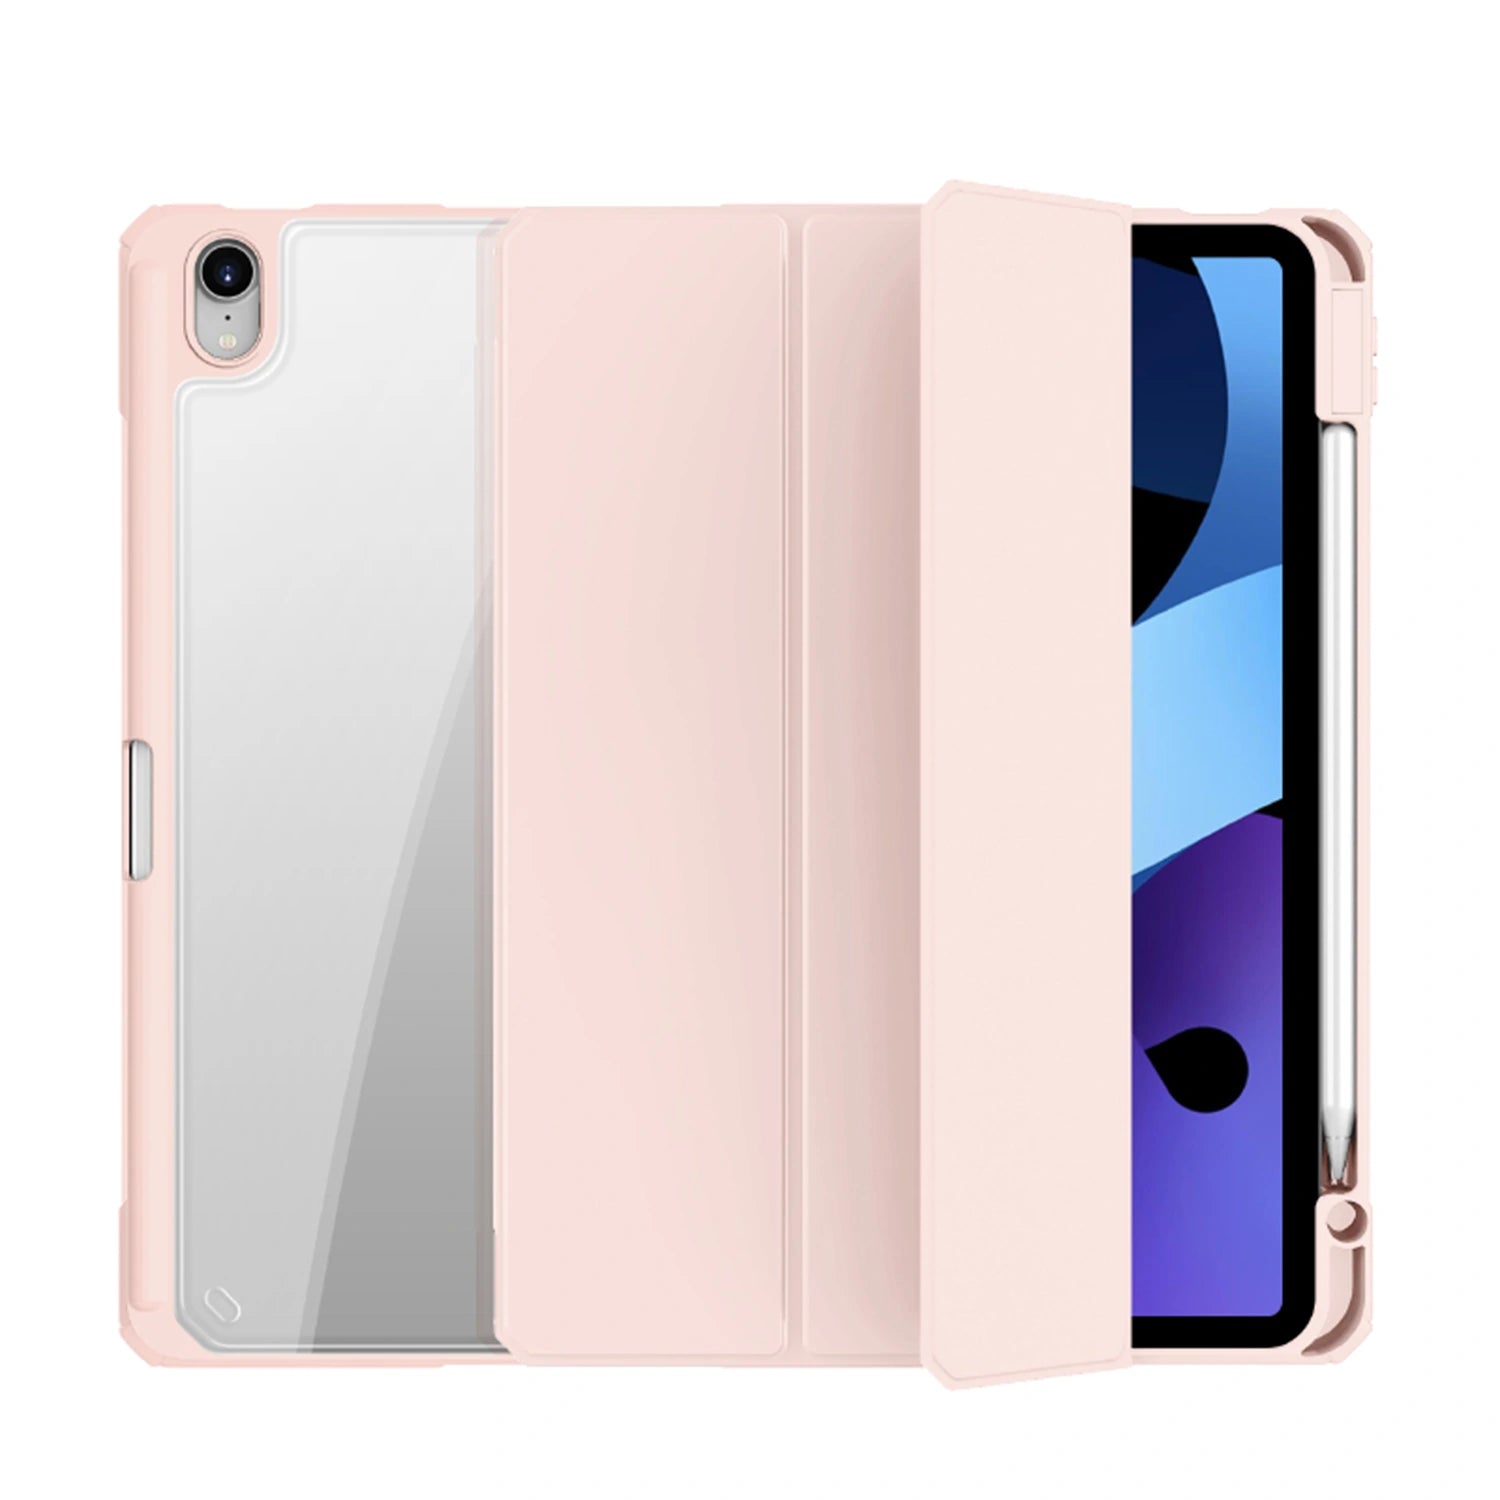 Mutural Pinyue Series Folio Case with Pencil Holder for iPad 9.7"/ 9th Gen 10.2 "/ Pro 10.5"/ Pro 11"/ Air 10.9"/ 10th Gen 10.9"/ Pro 12.9"